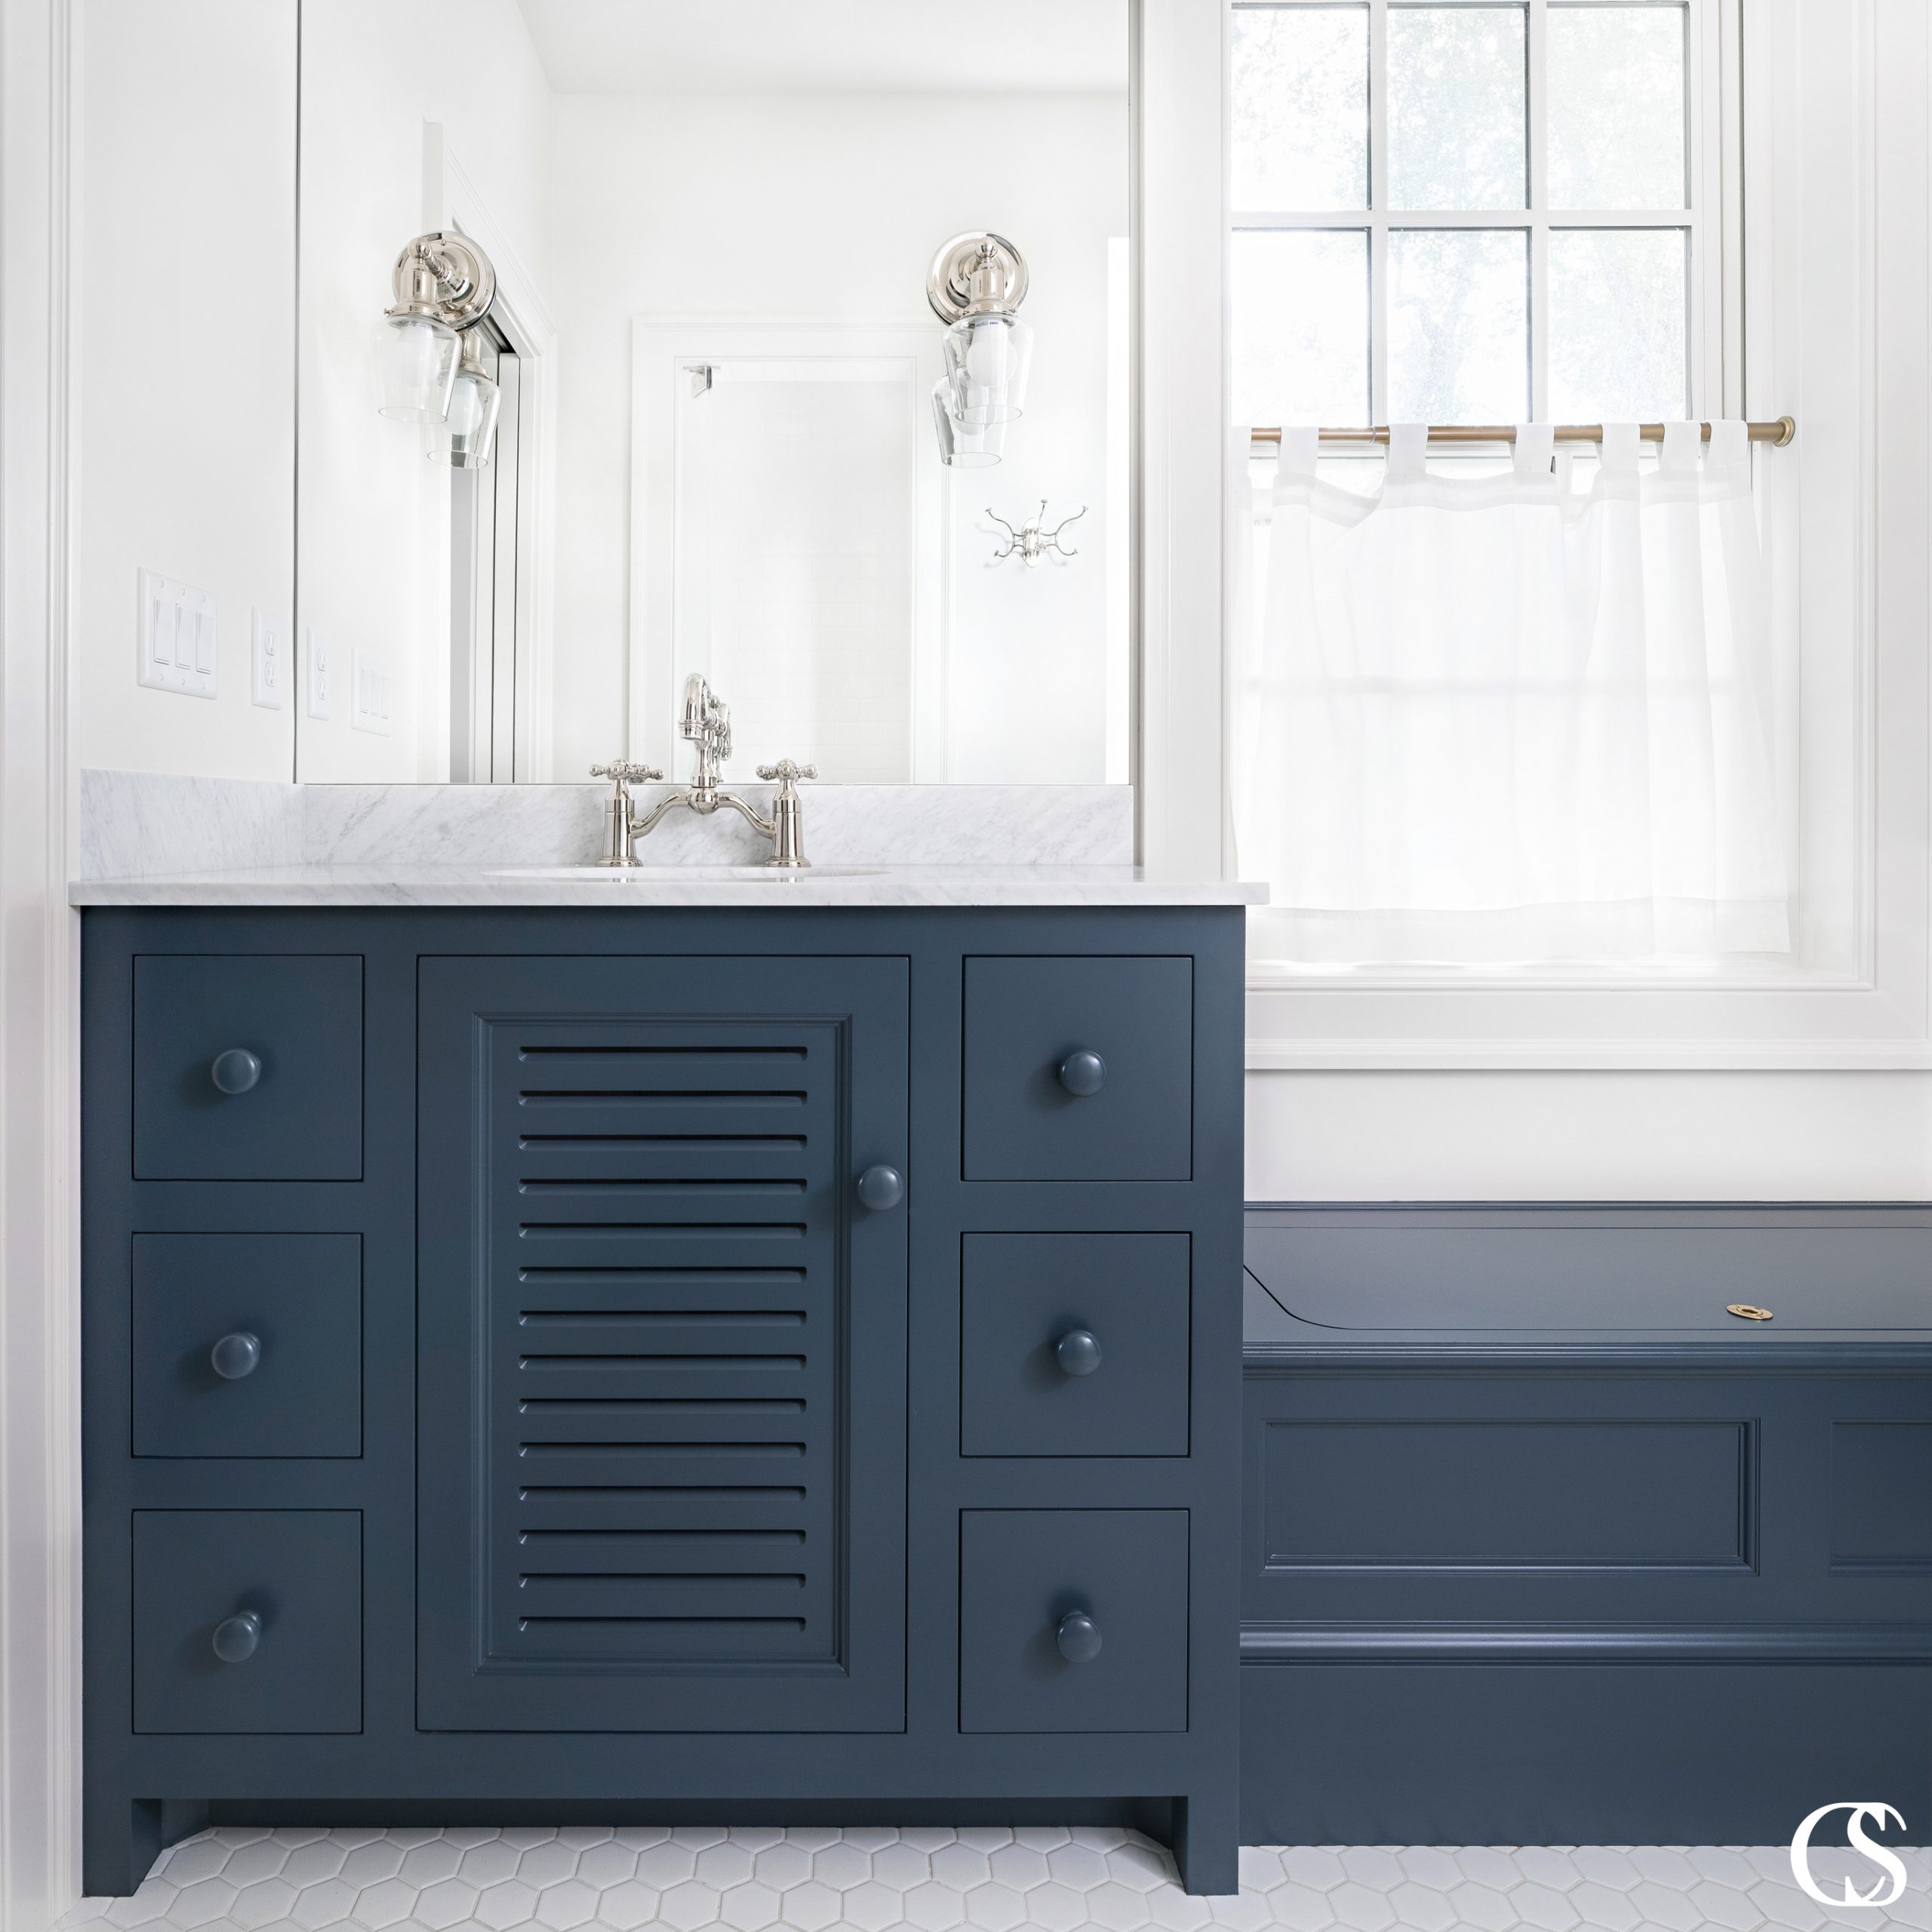 What could become a bulky bathroom cabinets design is completely changed by the slats in the center cupboard door. It's the little decisions like that which take custom cabinetry to the next level.